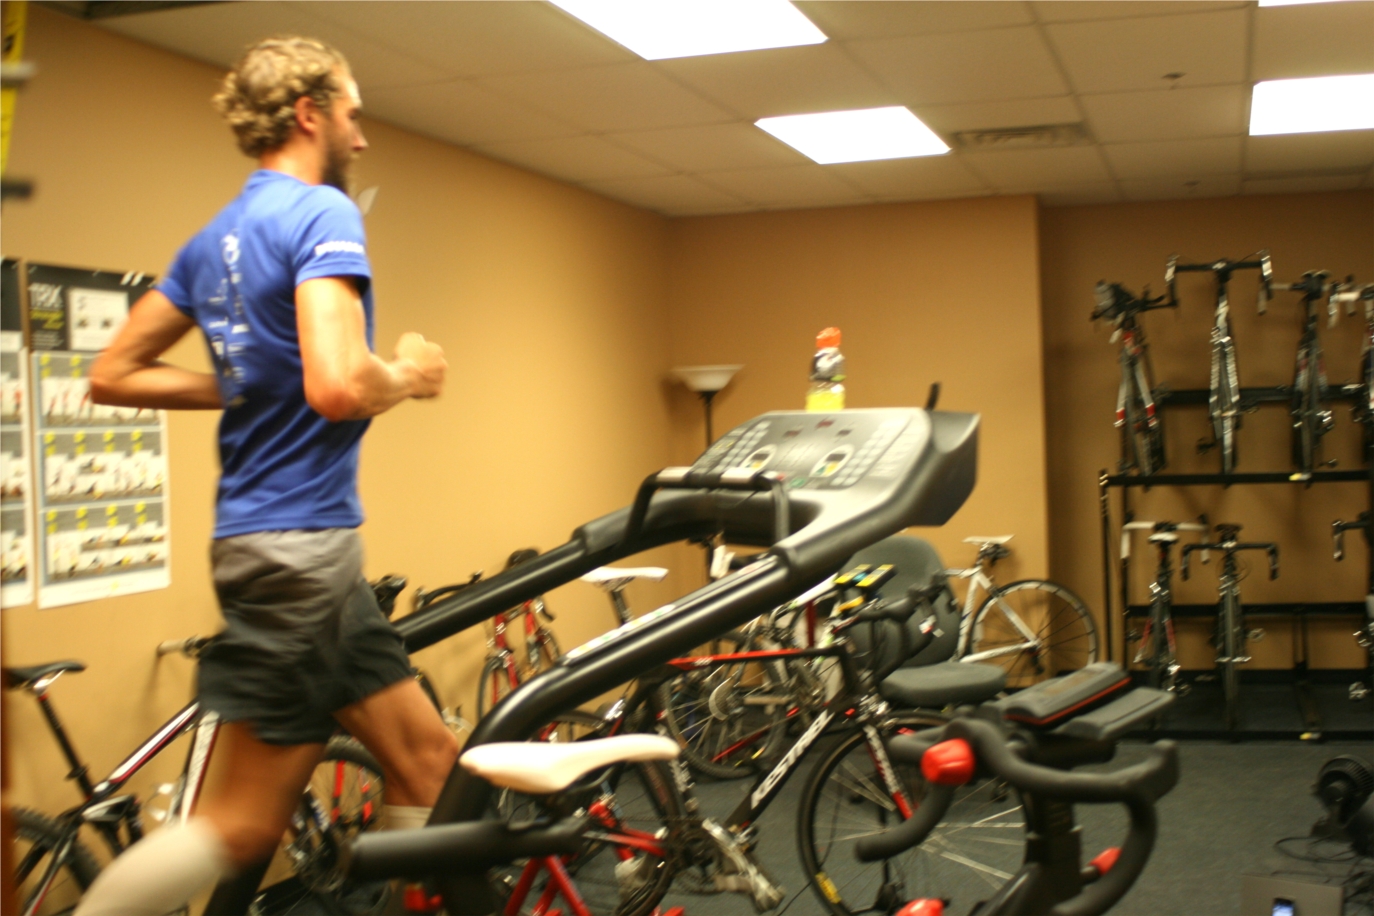 On-site workout facility known as the "Pain Cave" is available and used all day long.